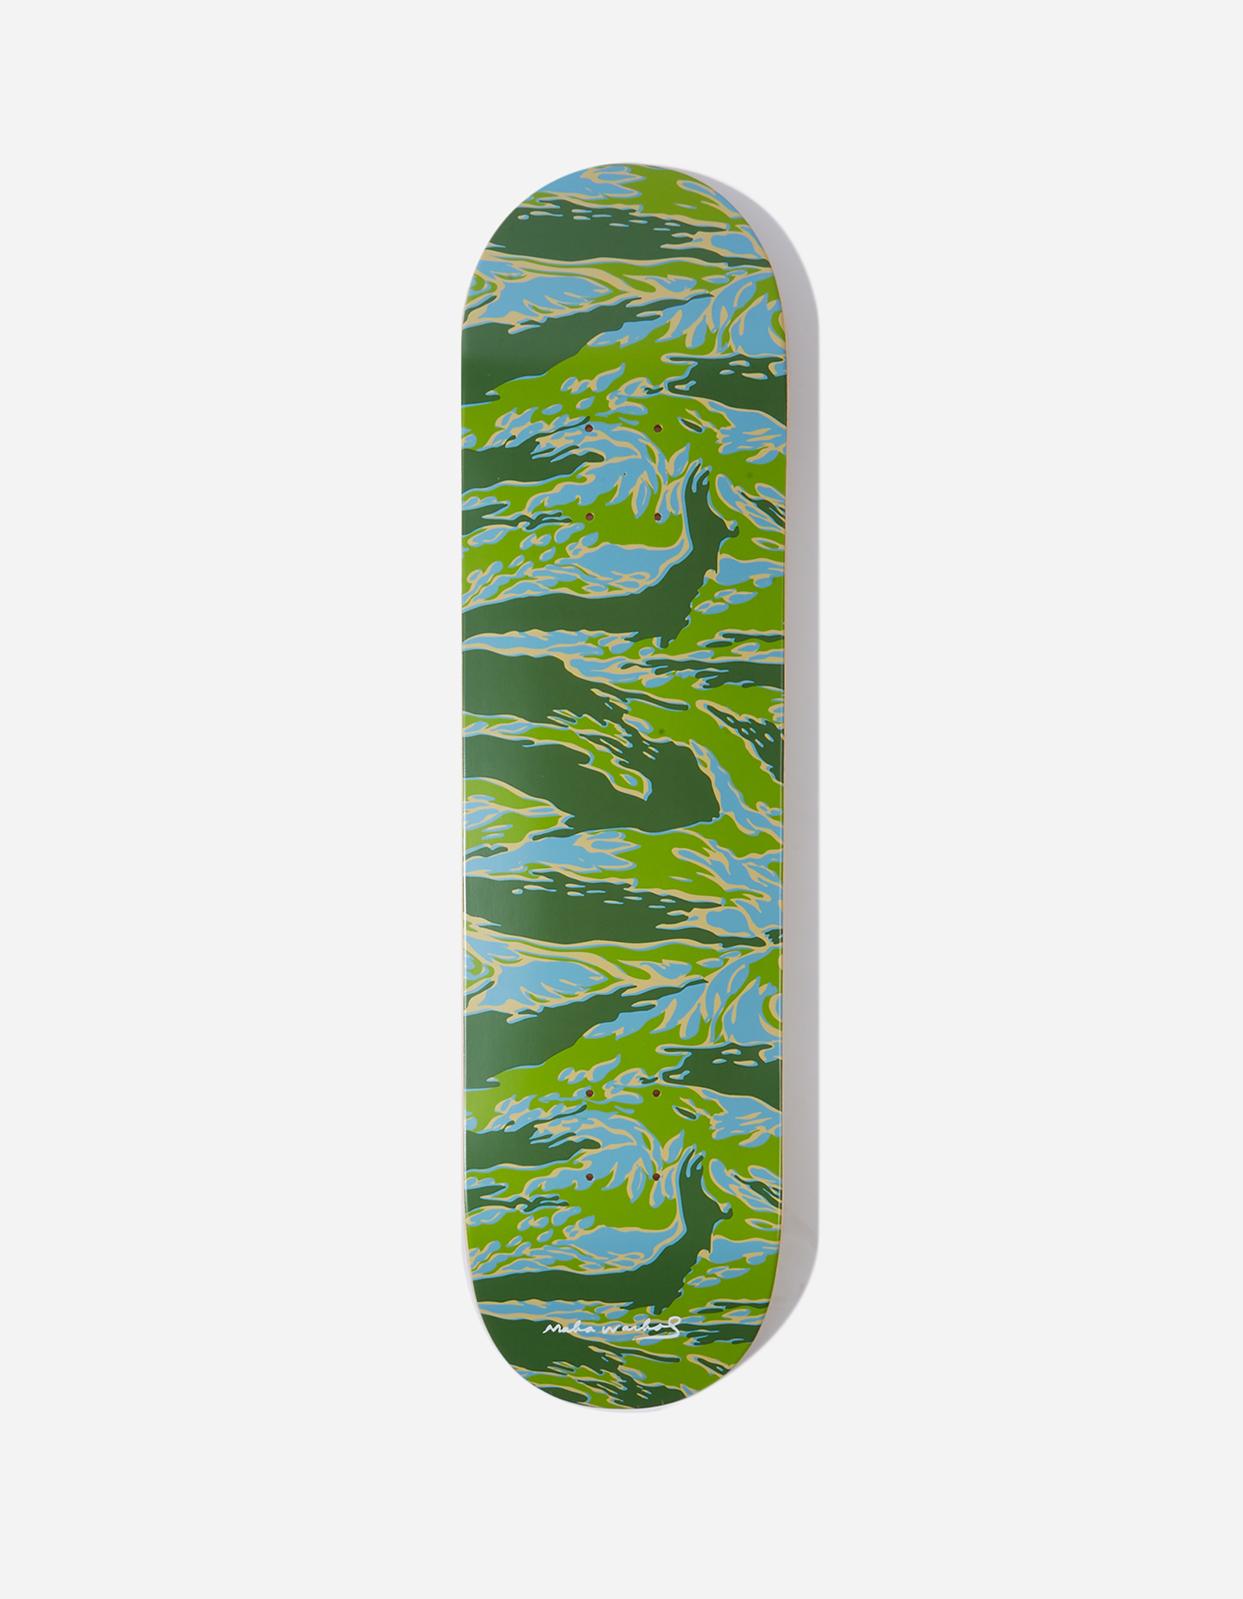 DPM: Pop tigerskins series 3

Maharishi and the Andy Warhol foundation continue their ongoing series of collaborative works with this set of camouflage skateboard decks.

The Canadian maple deck features a series of six vivid pop colour